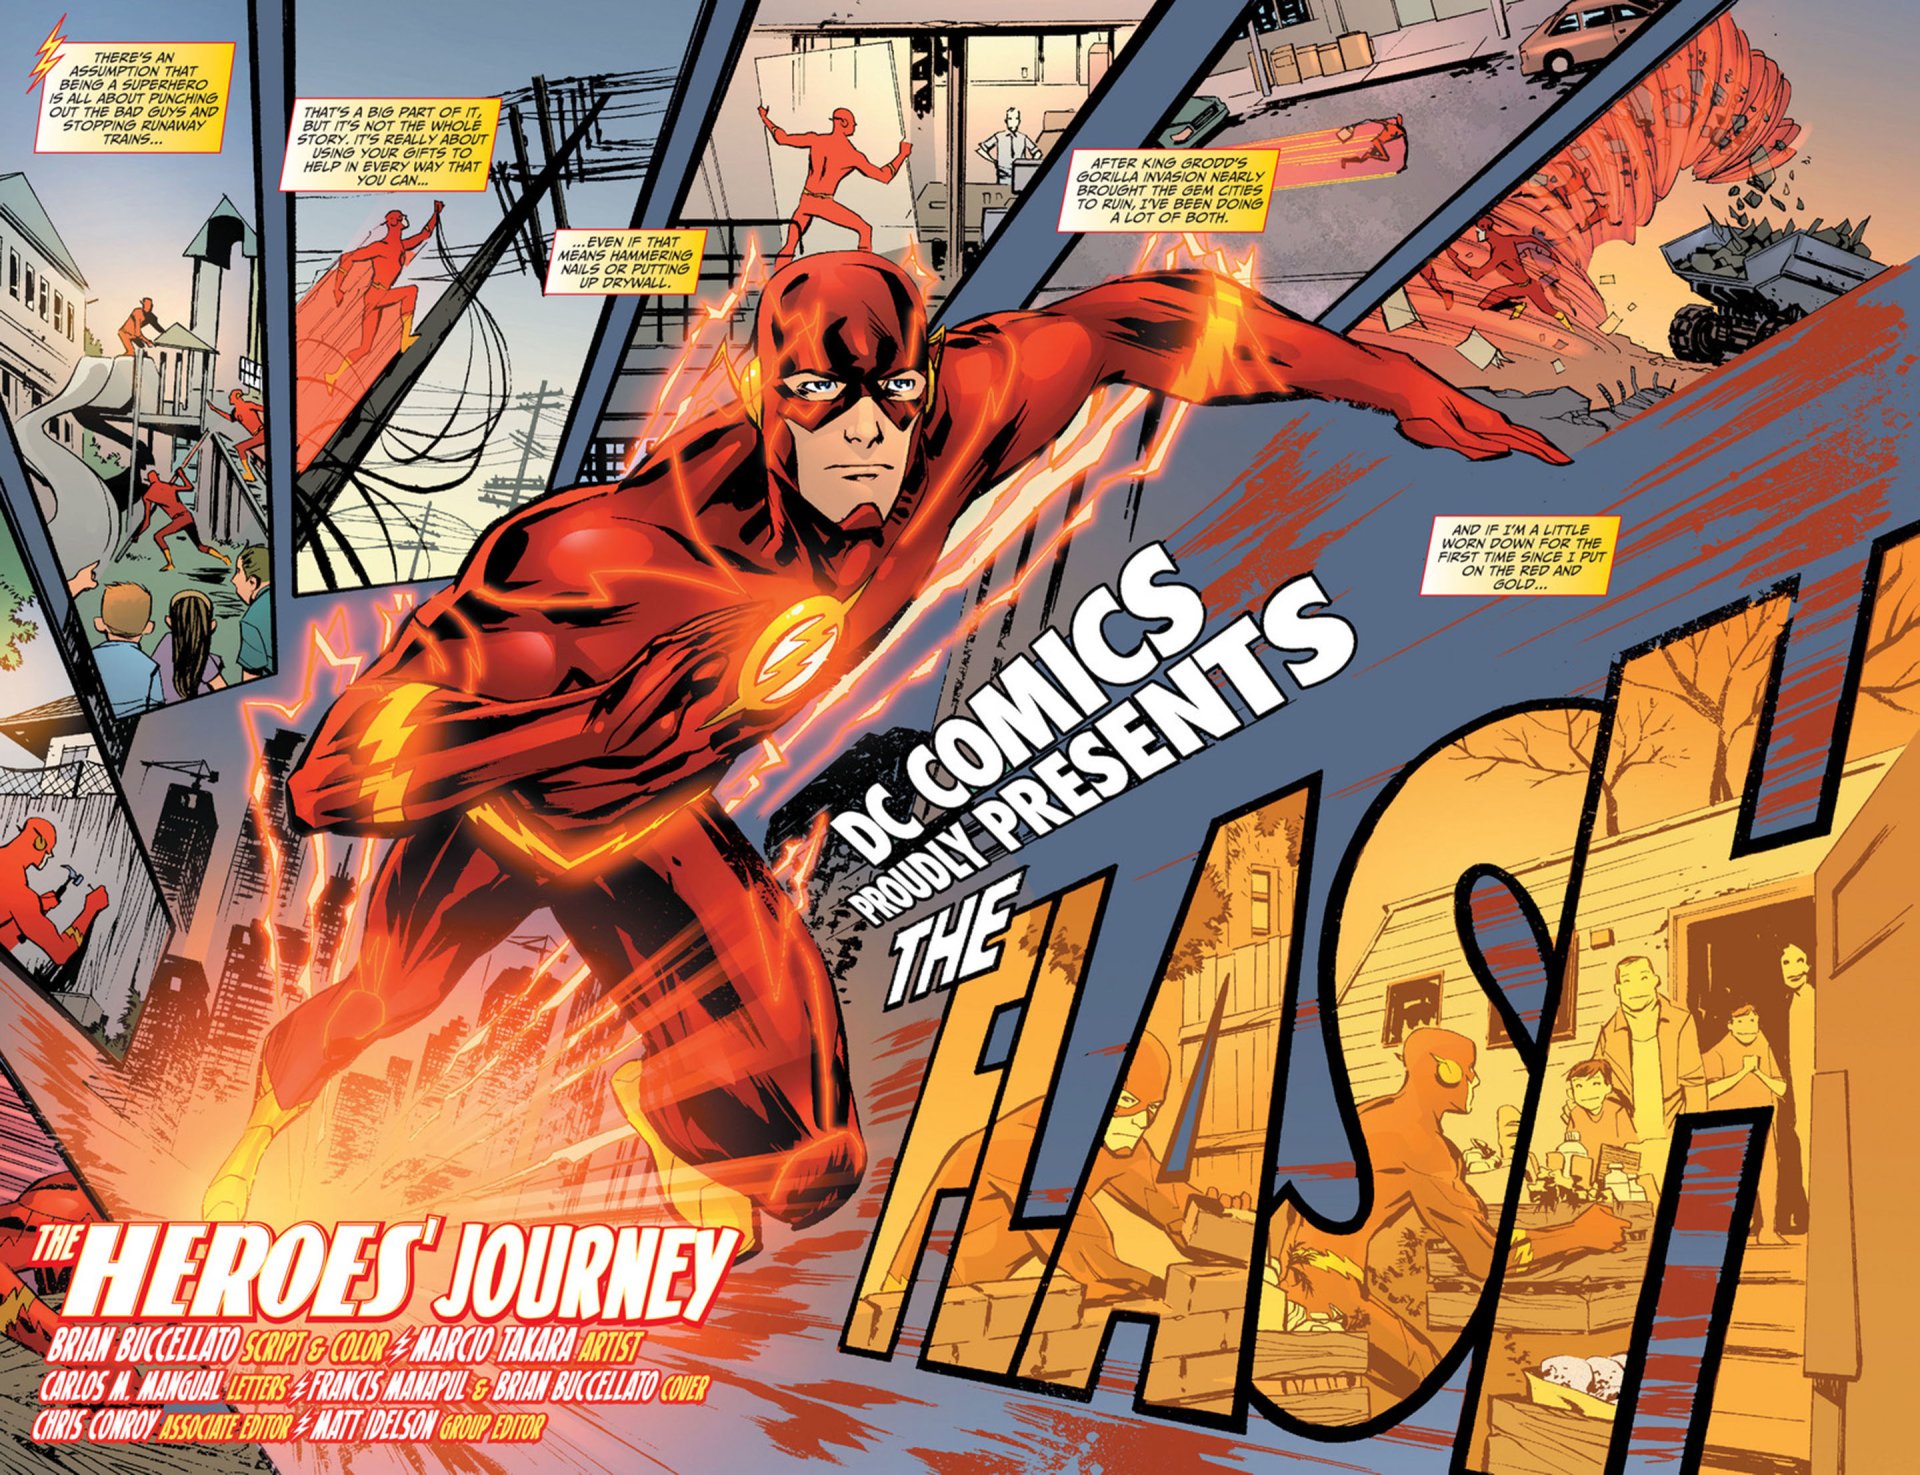 The Flash Heroes Journey Graphic Novel Review